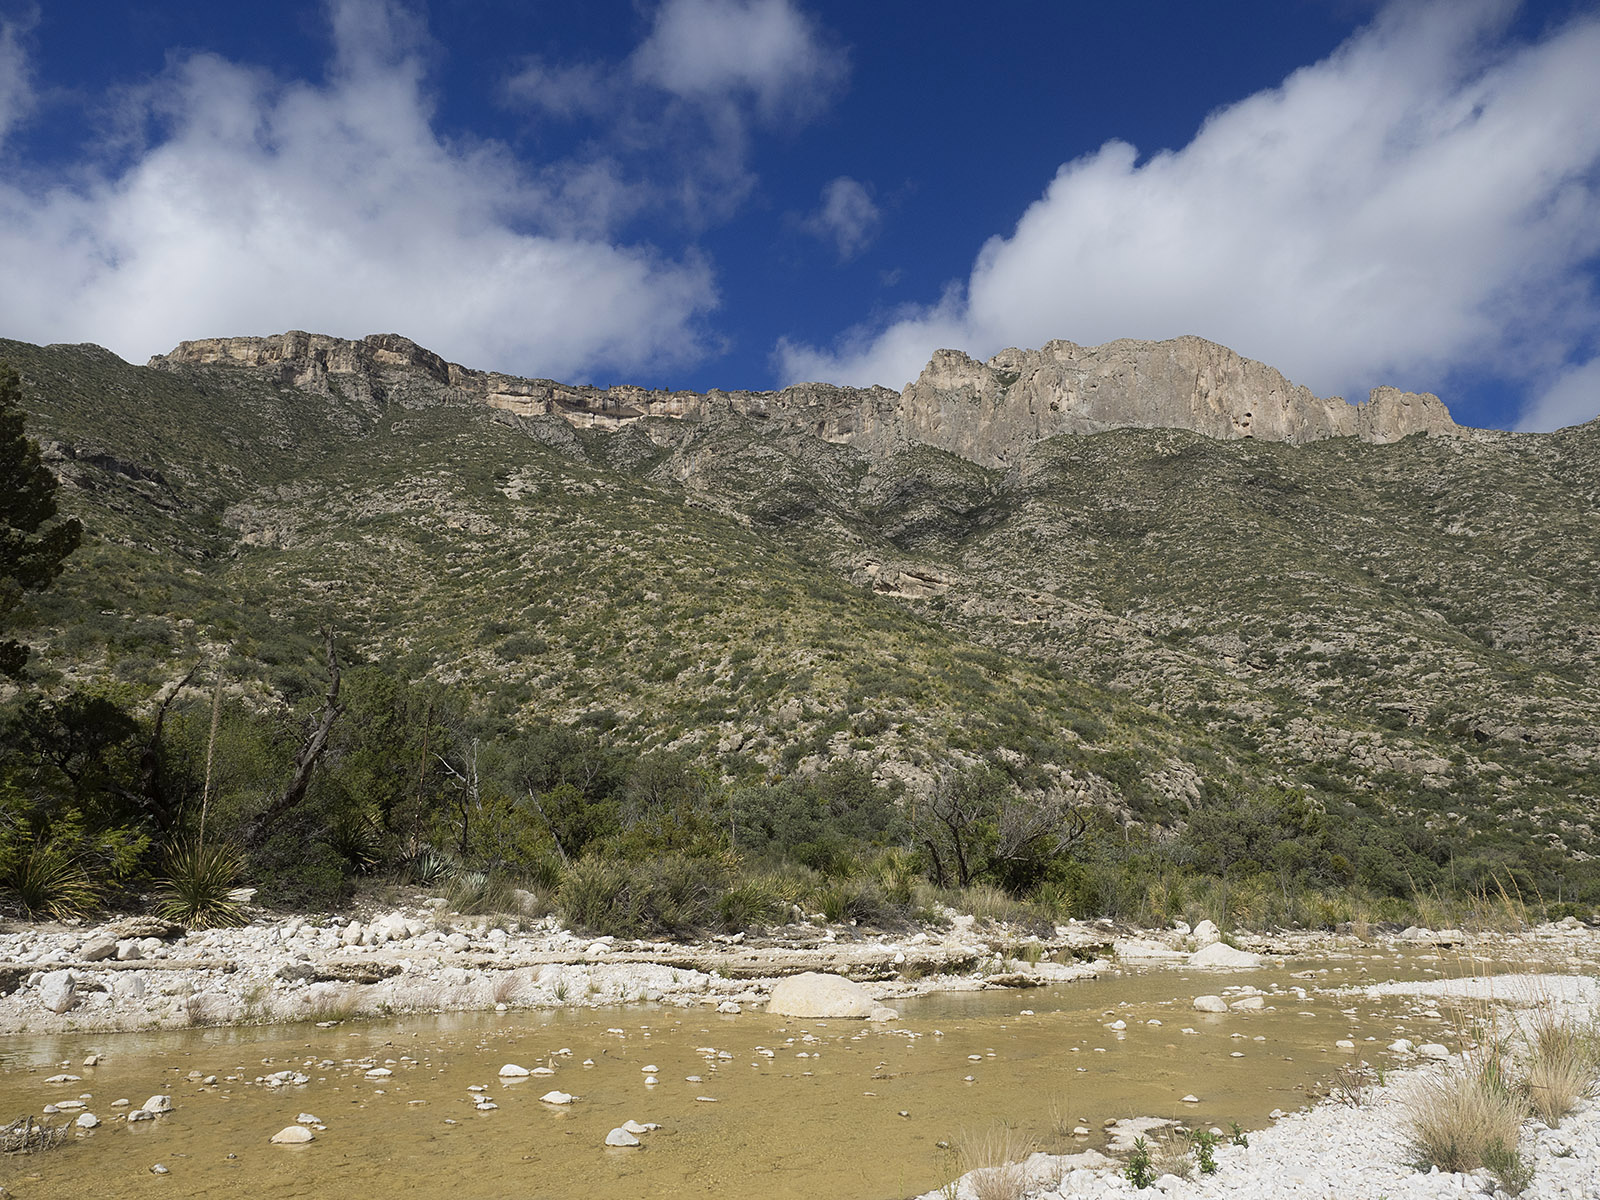 McKittrick Canyon showing the top strata of what used to be a tropical reef during the Permian Period.